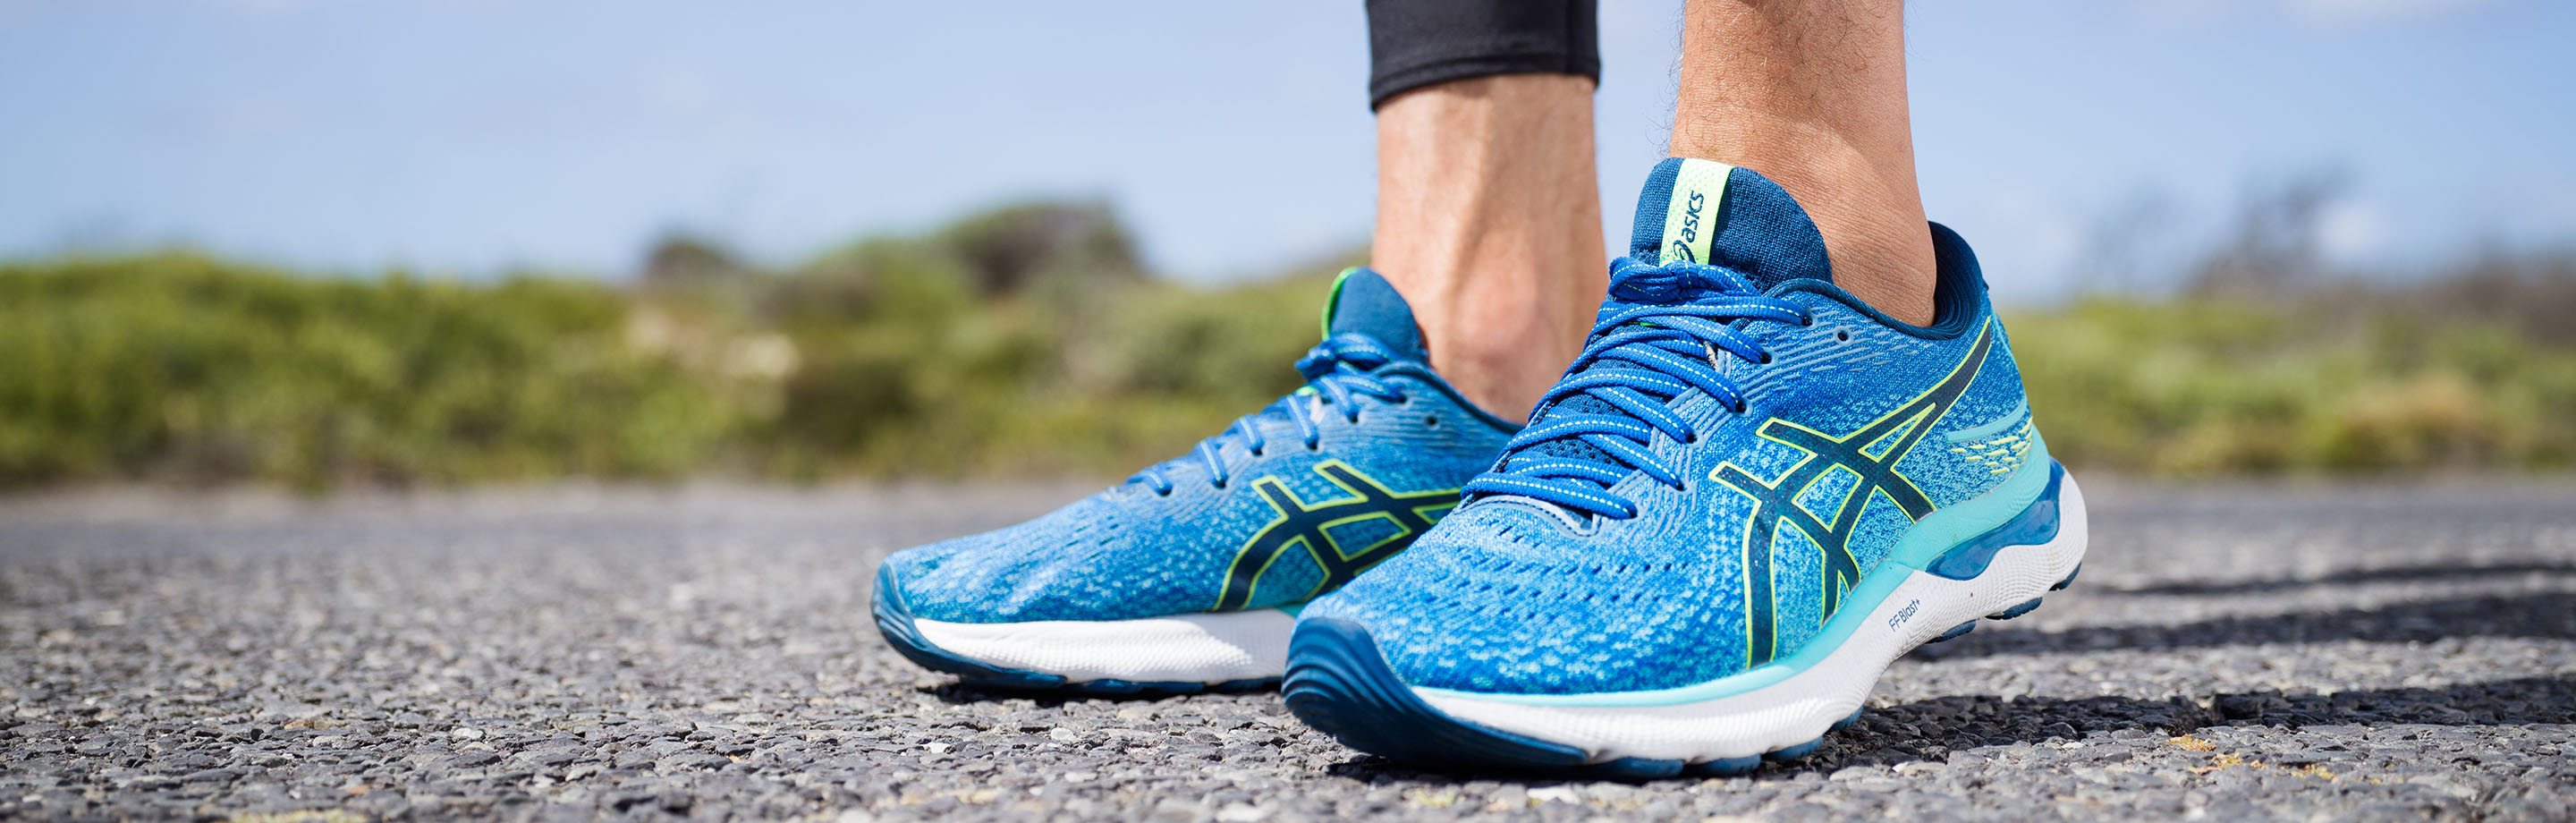 asics – Running Shoes and Activewear